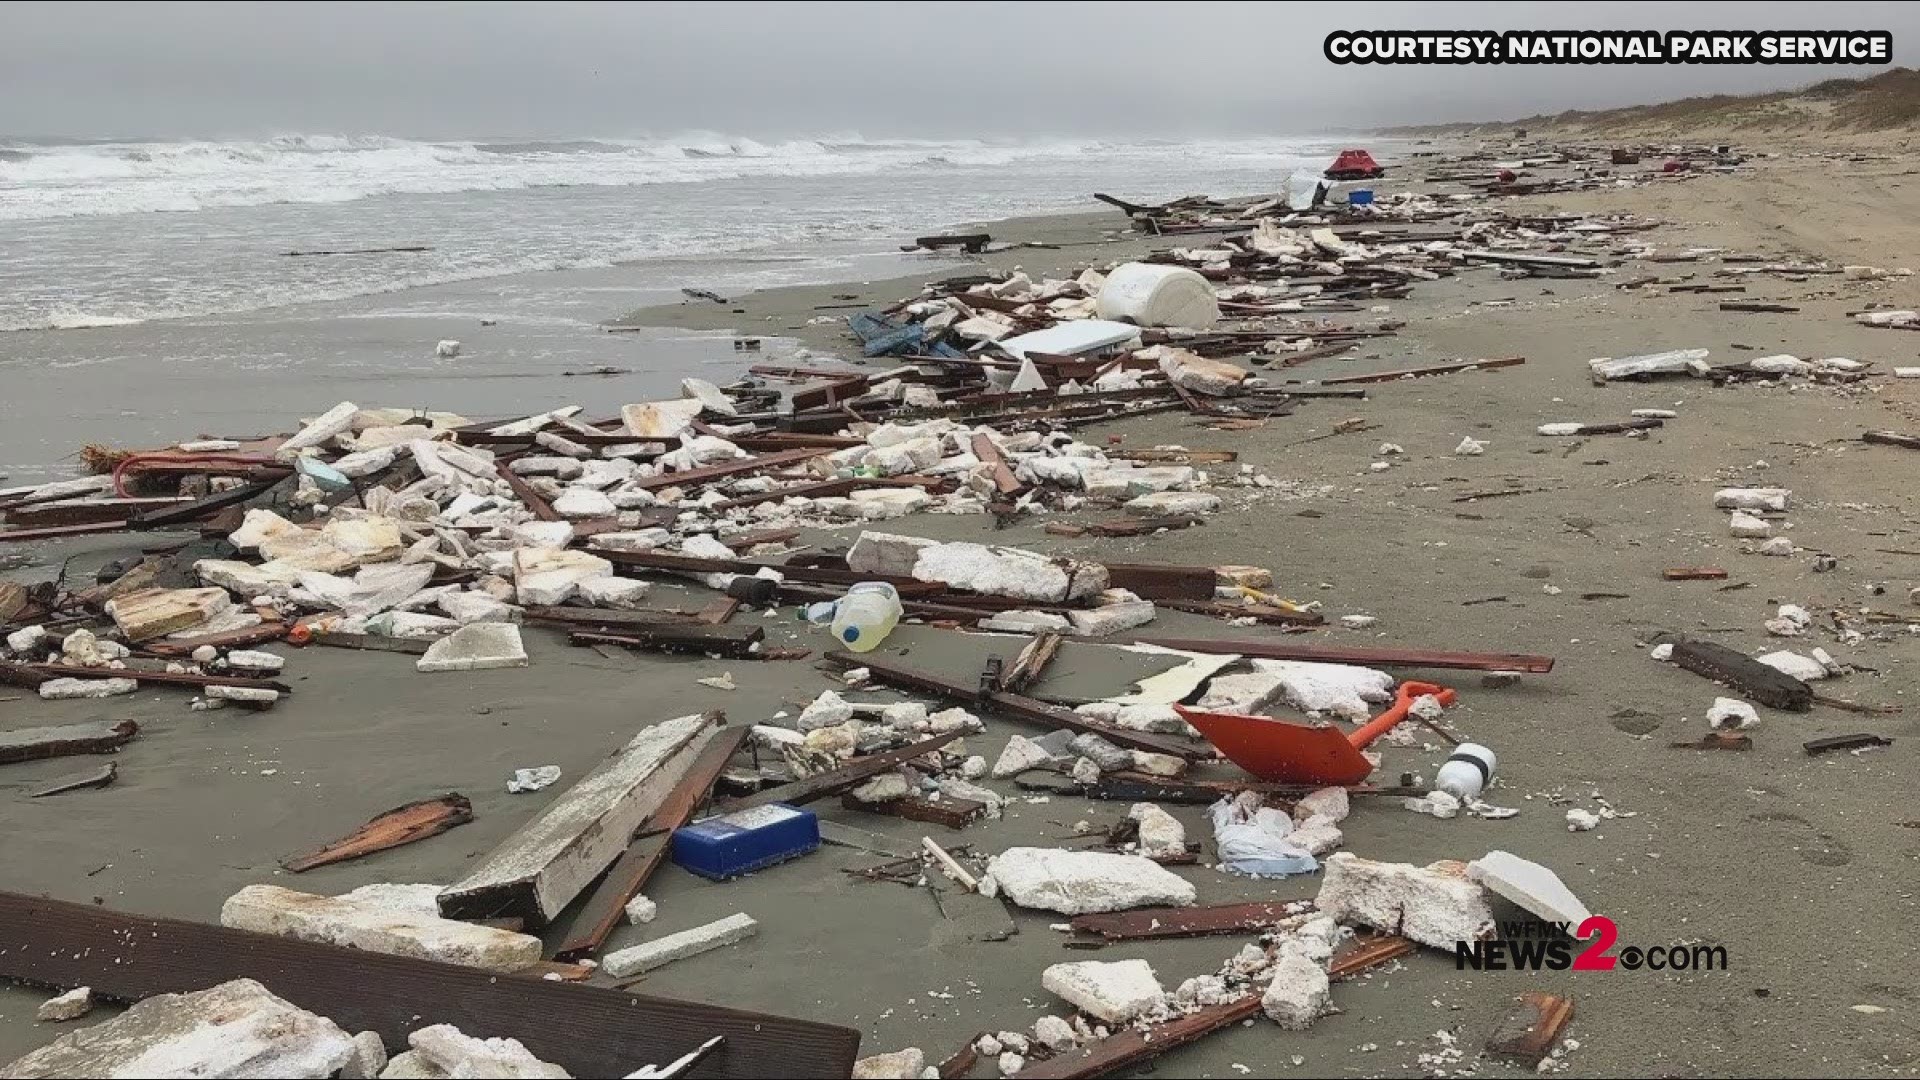 The wreckage from a shrimp boat is causing a big mess in the Outer Banks! The crew of three men were found alive Monday on the beach in Frisco, North Carolina.